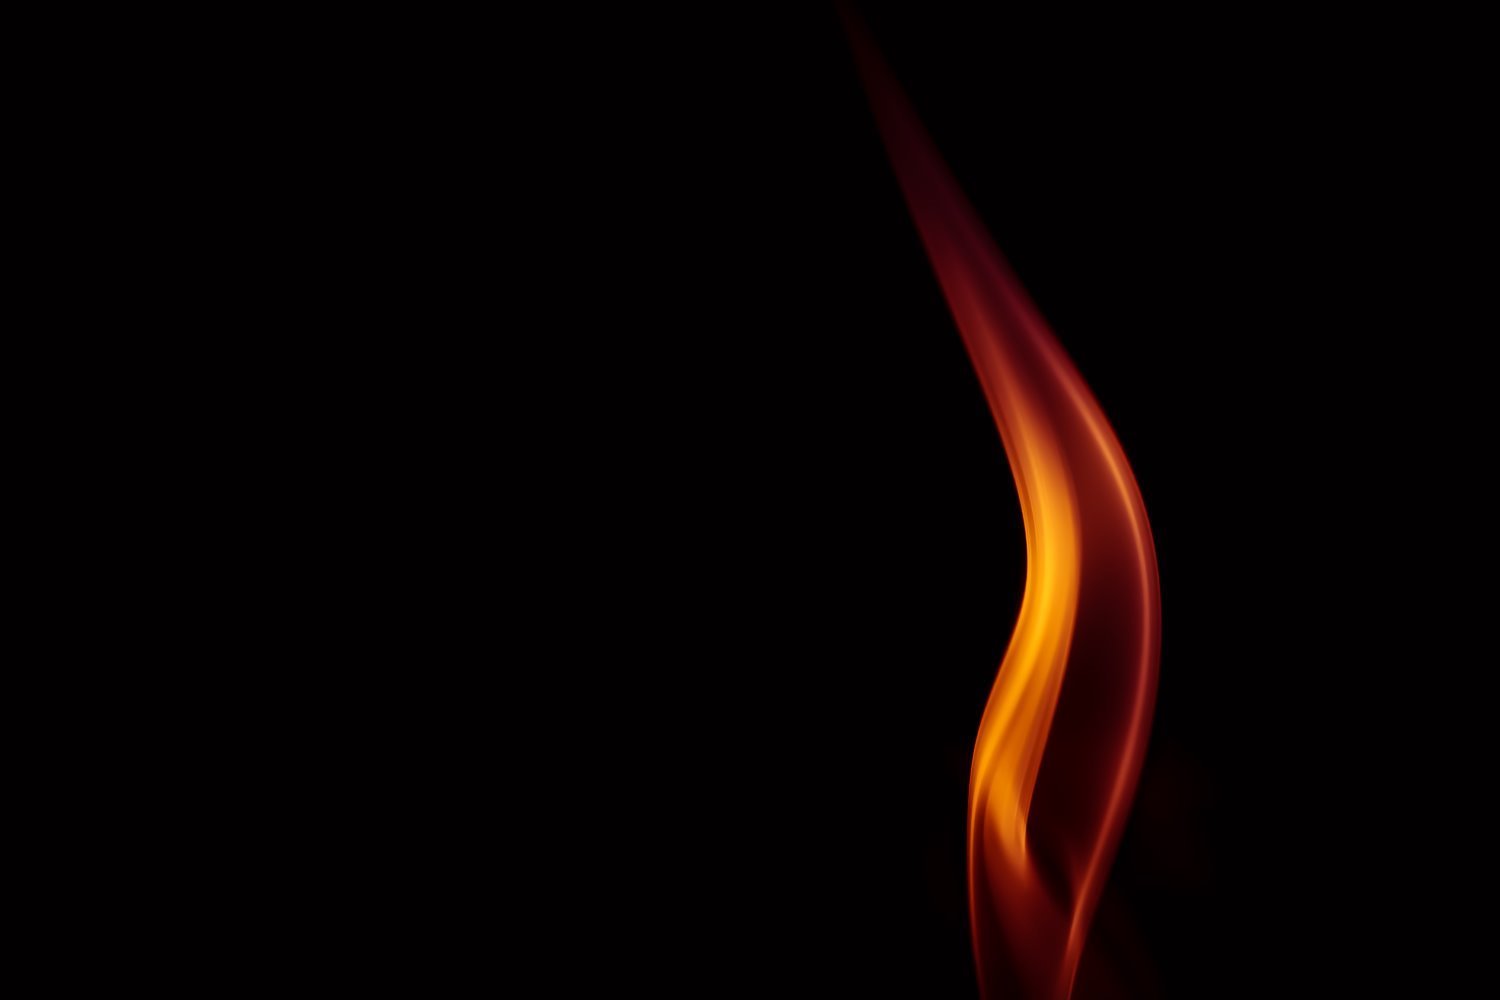 Fire Photography: 11 Expert Tips for Gorgeous Results